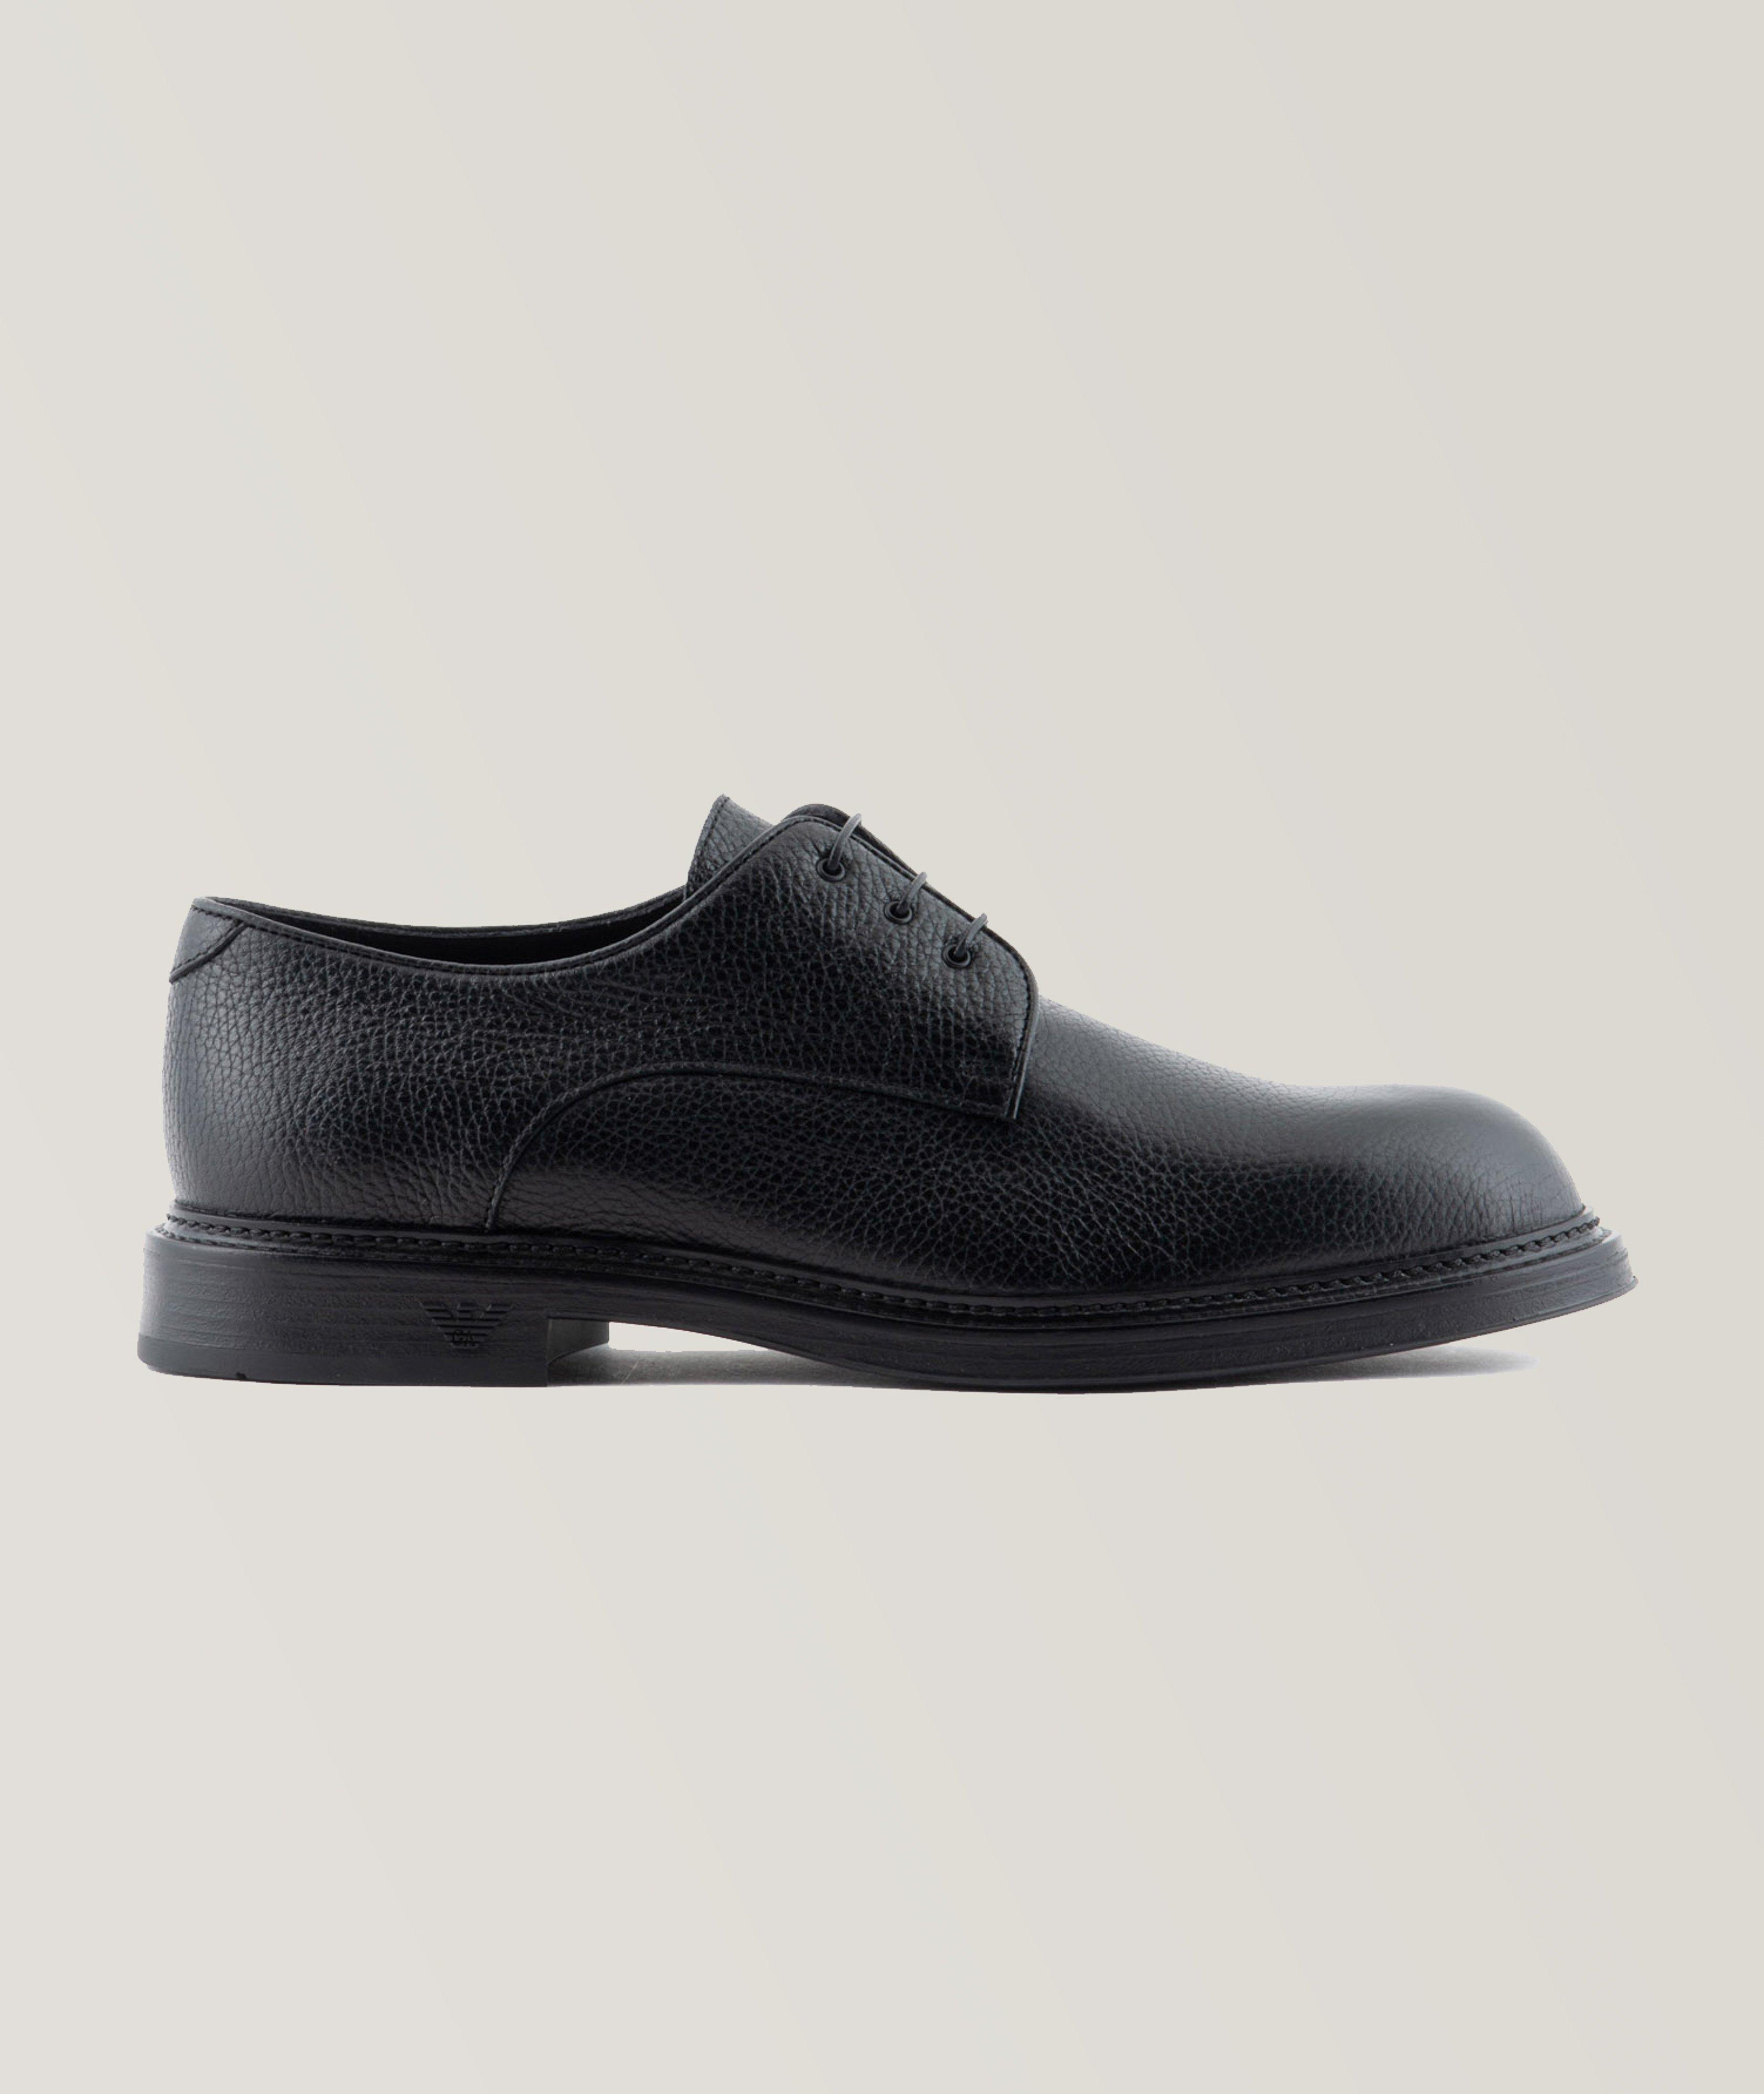 Leather Lace-Up Derbies image 0